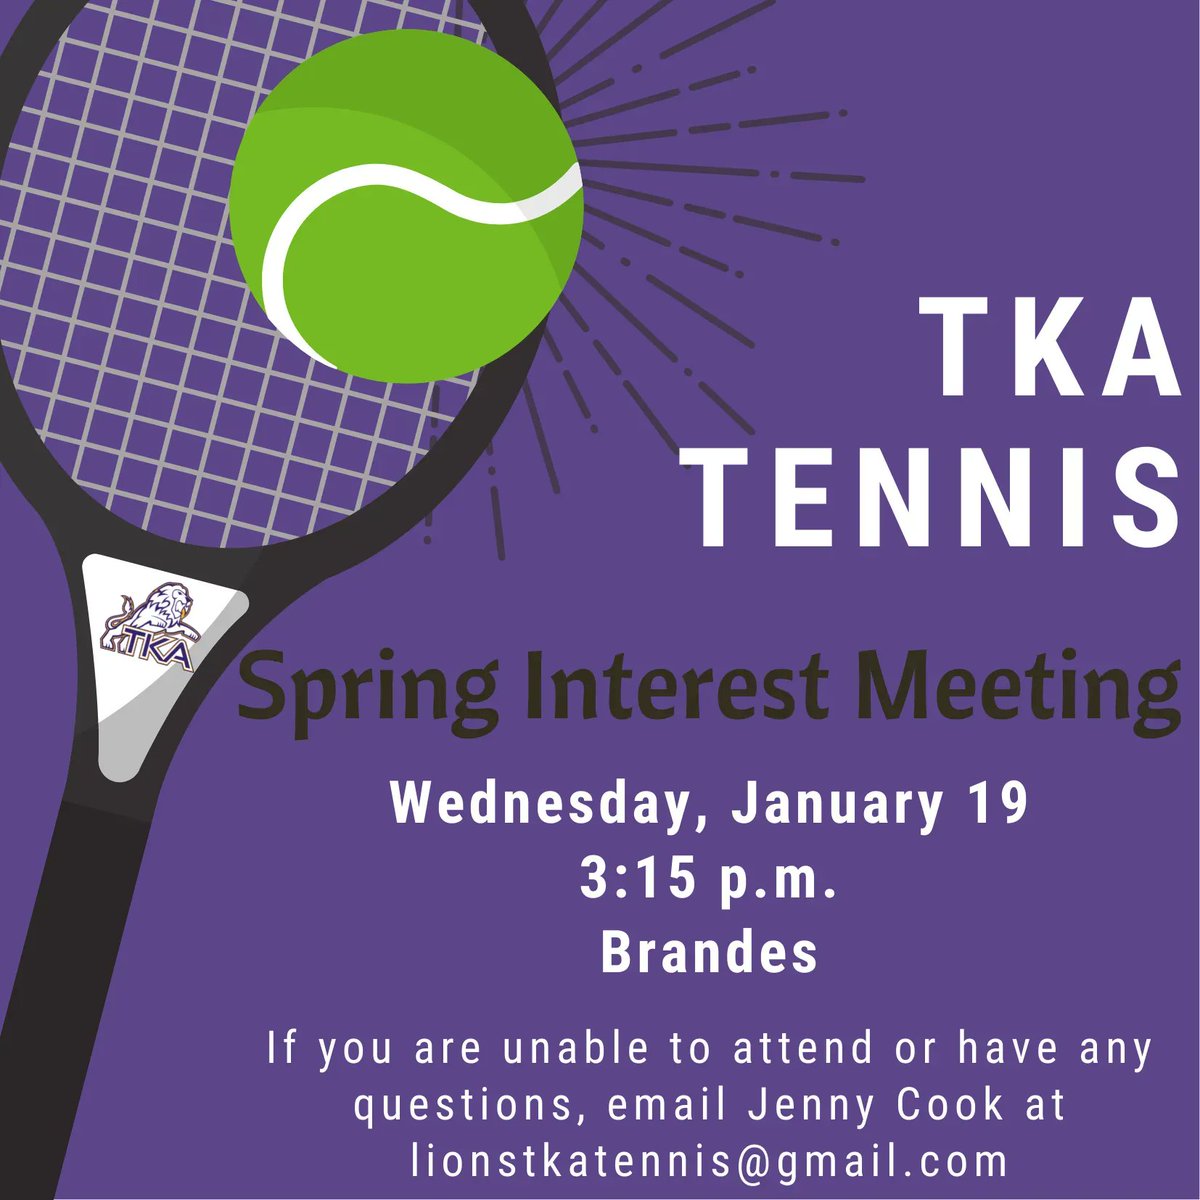 High school students who are interested in playing tennis for the spring semester, there will be a meeting on Wednesday, January 19, at 3:15 p.m. in Brandes. No prior experience is needed!

If you have any questions, email Jenny Cook at lionstkatennis@gmail.com. https://t.co/jFGoY9f1UA